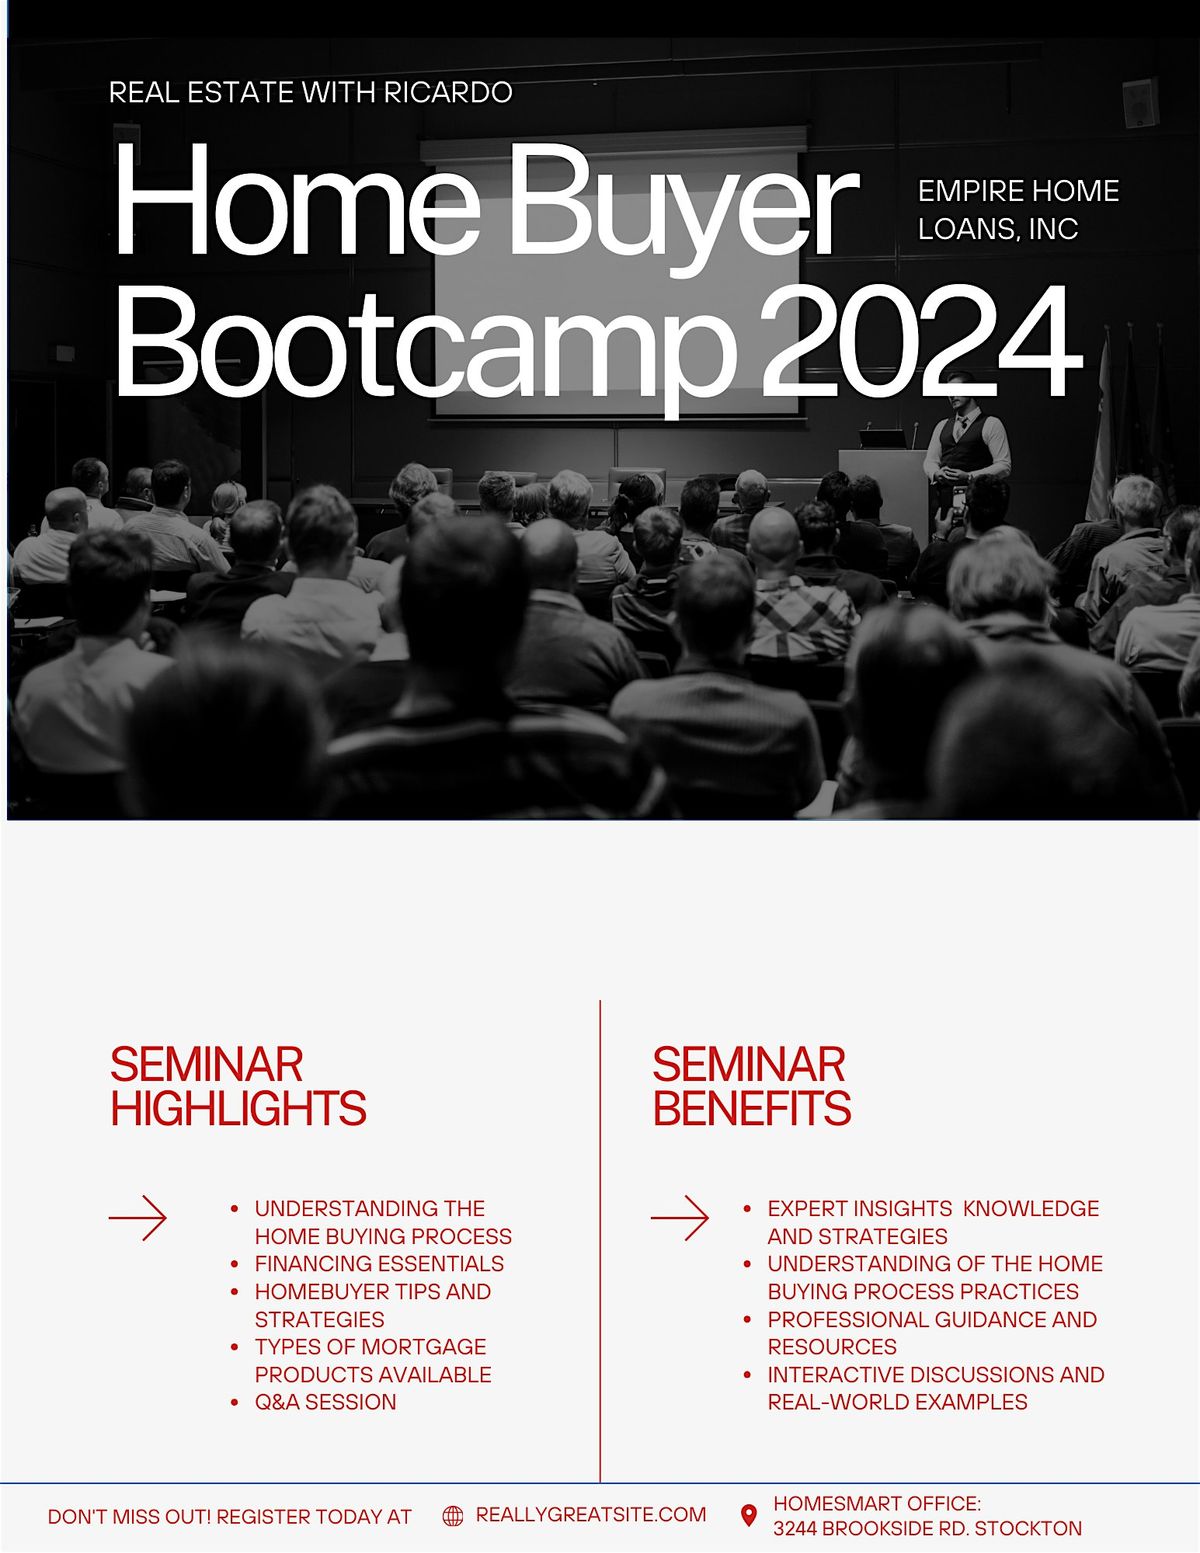 Home Buyer Bootcamp: Your Path to Homeownership